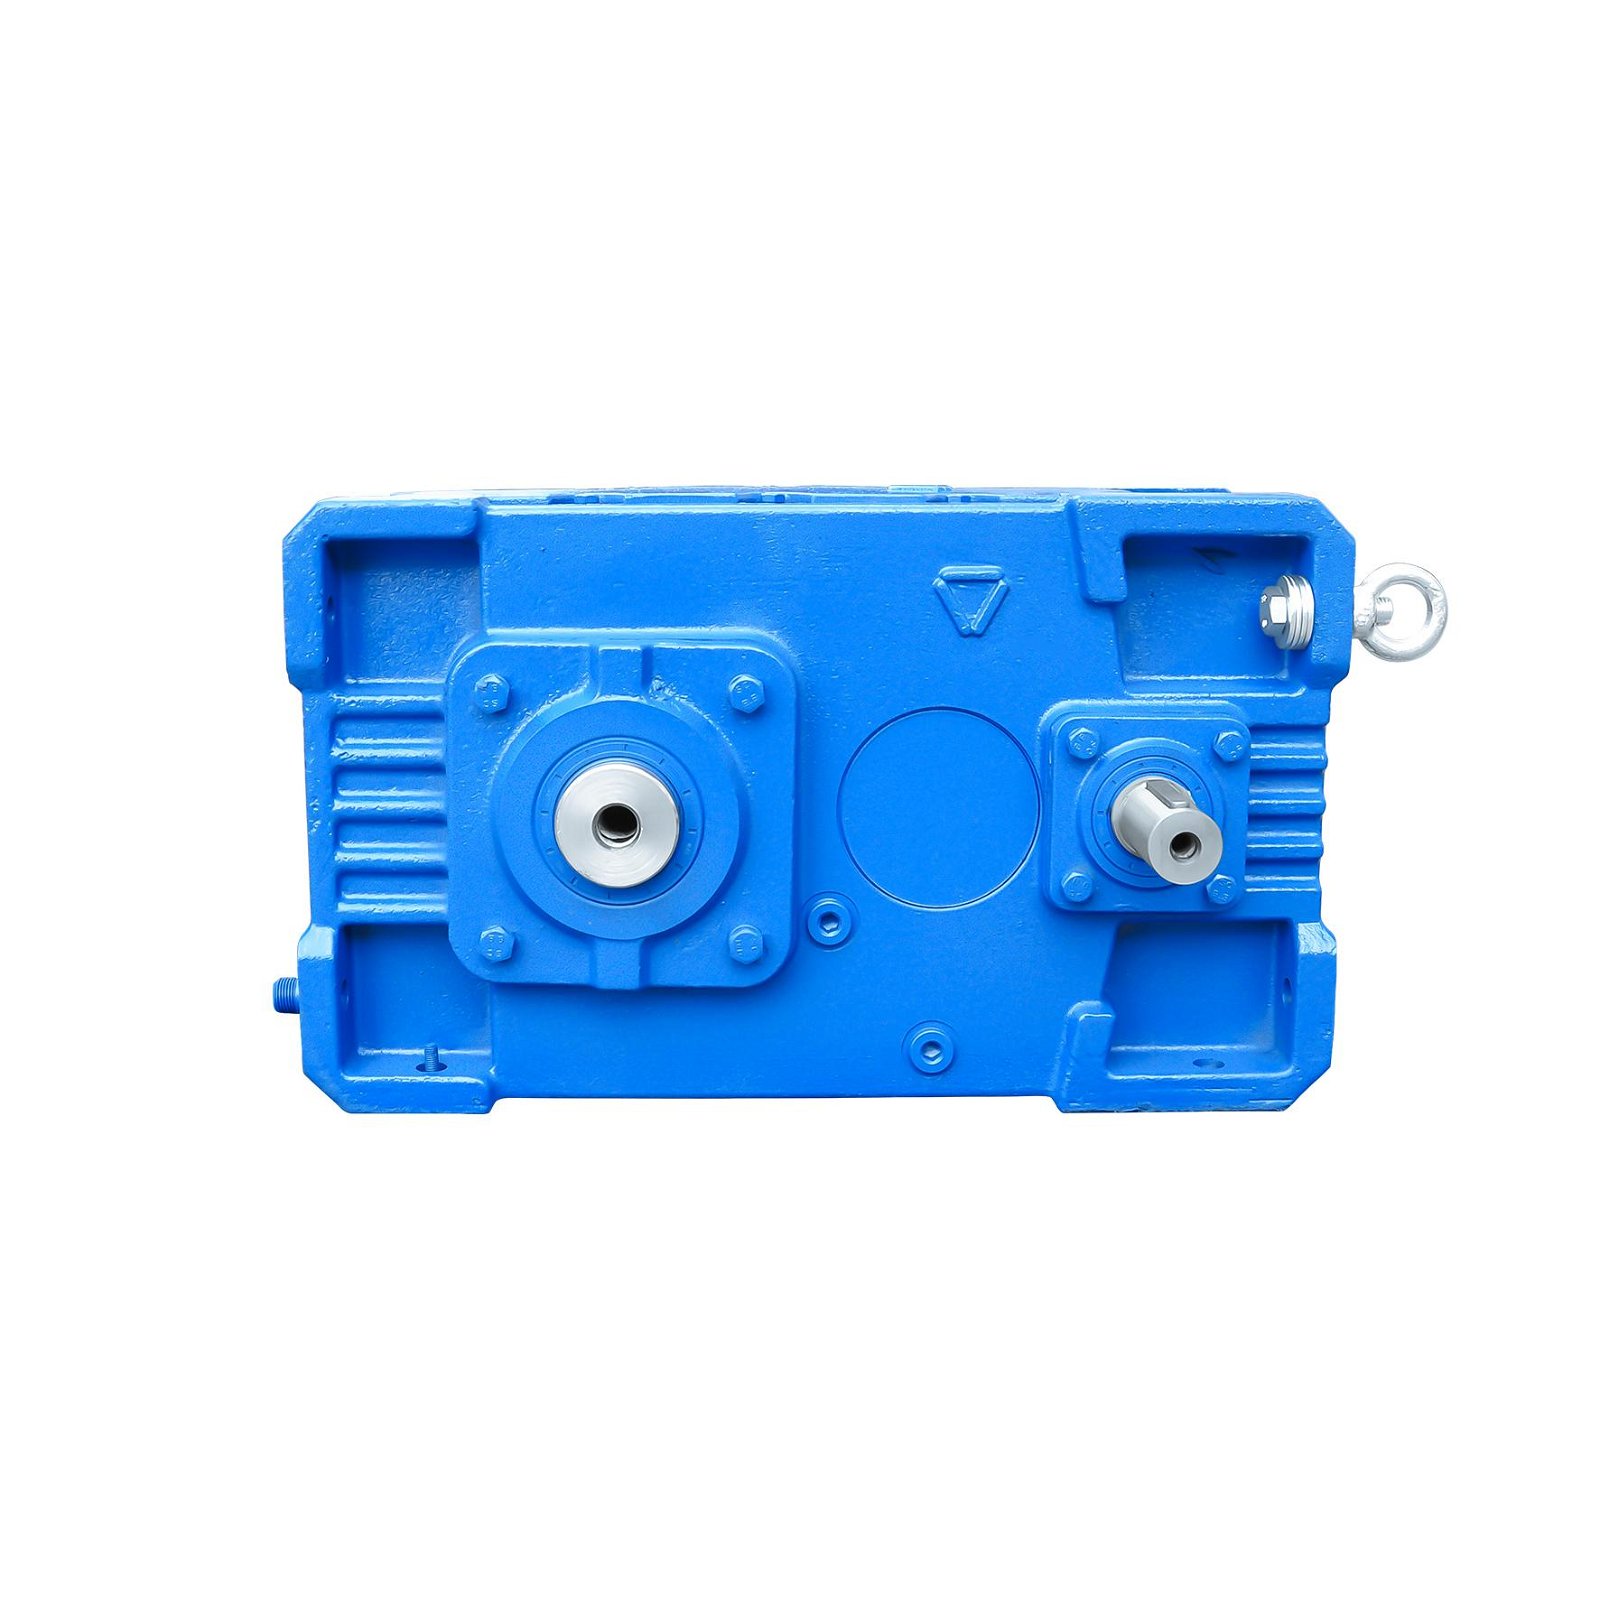 High quality ZLYJ extruder gear box for single screw plastic extruder  4